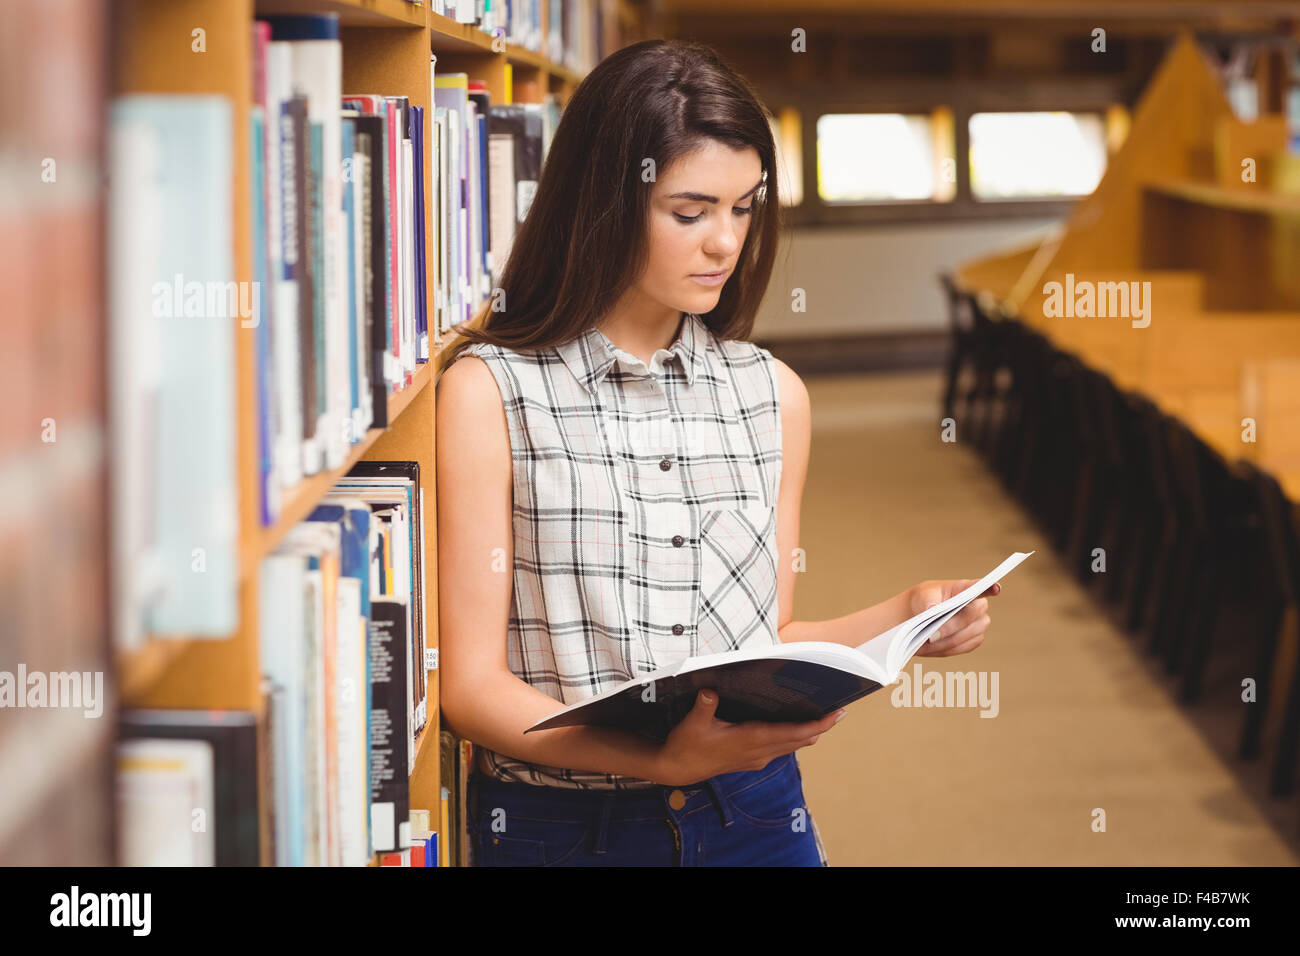 Female student learning from book Stock Photo